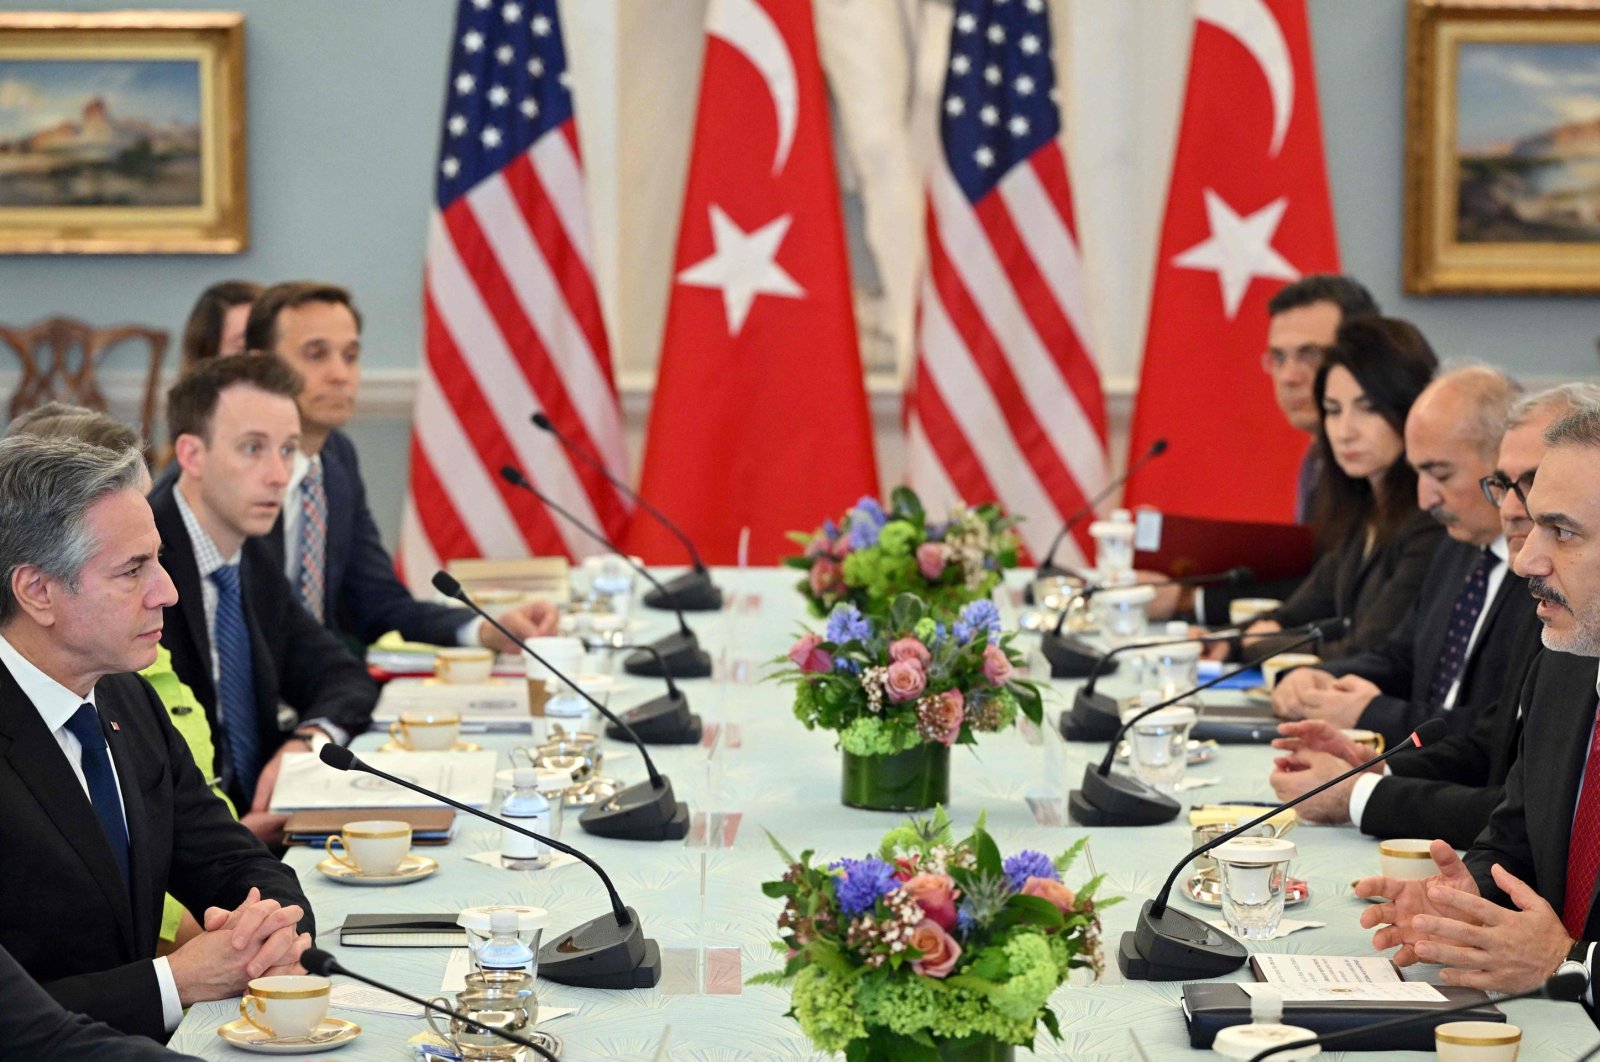 U.S. Secretary of State Antony Blinken (L) takes part in a meeting with Foreign Minister Hakan Fidan (R) in the Thomas Jefferson Room of the State Department in Washington, D.C., March 8, 2024. (AFP Photo)